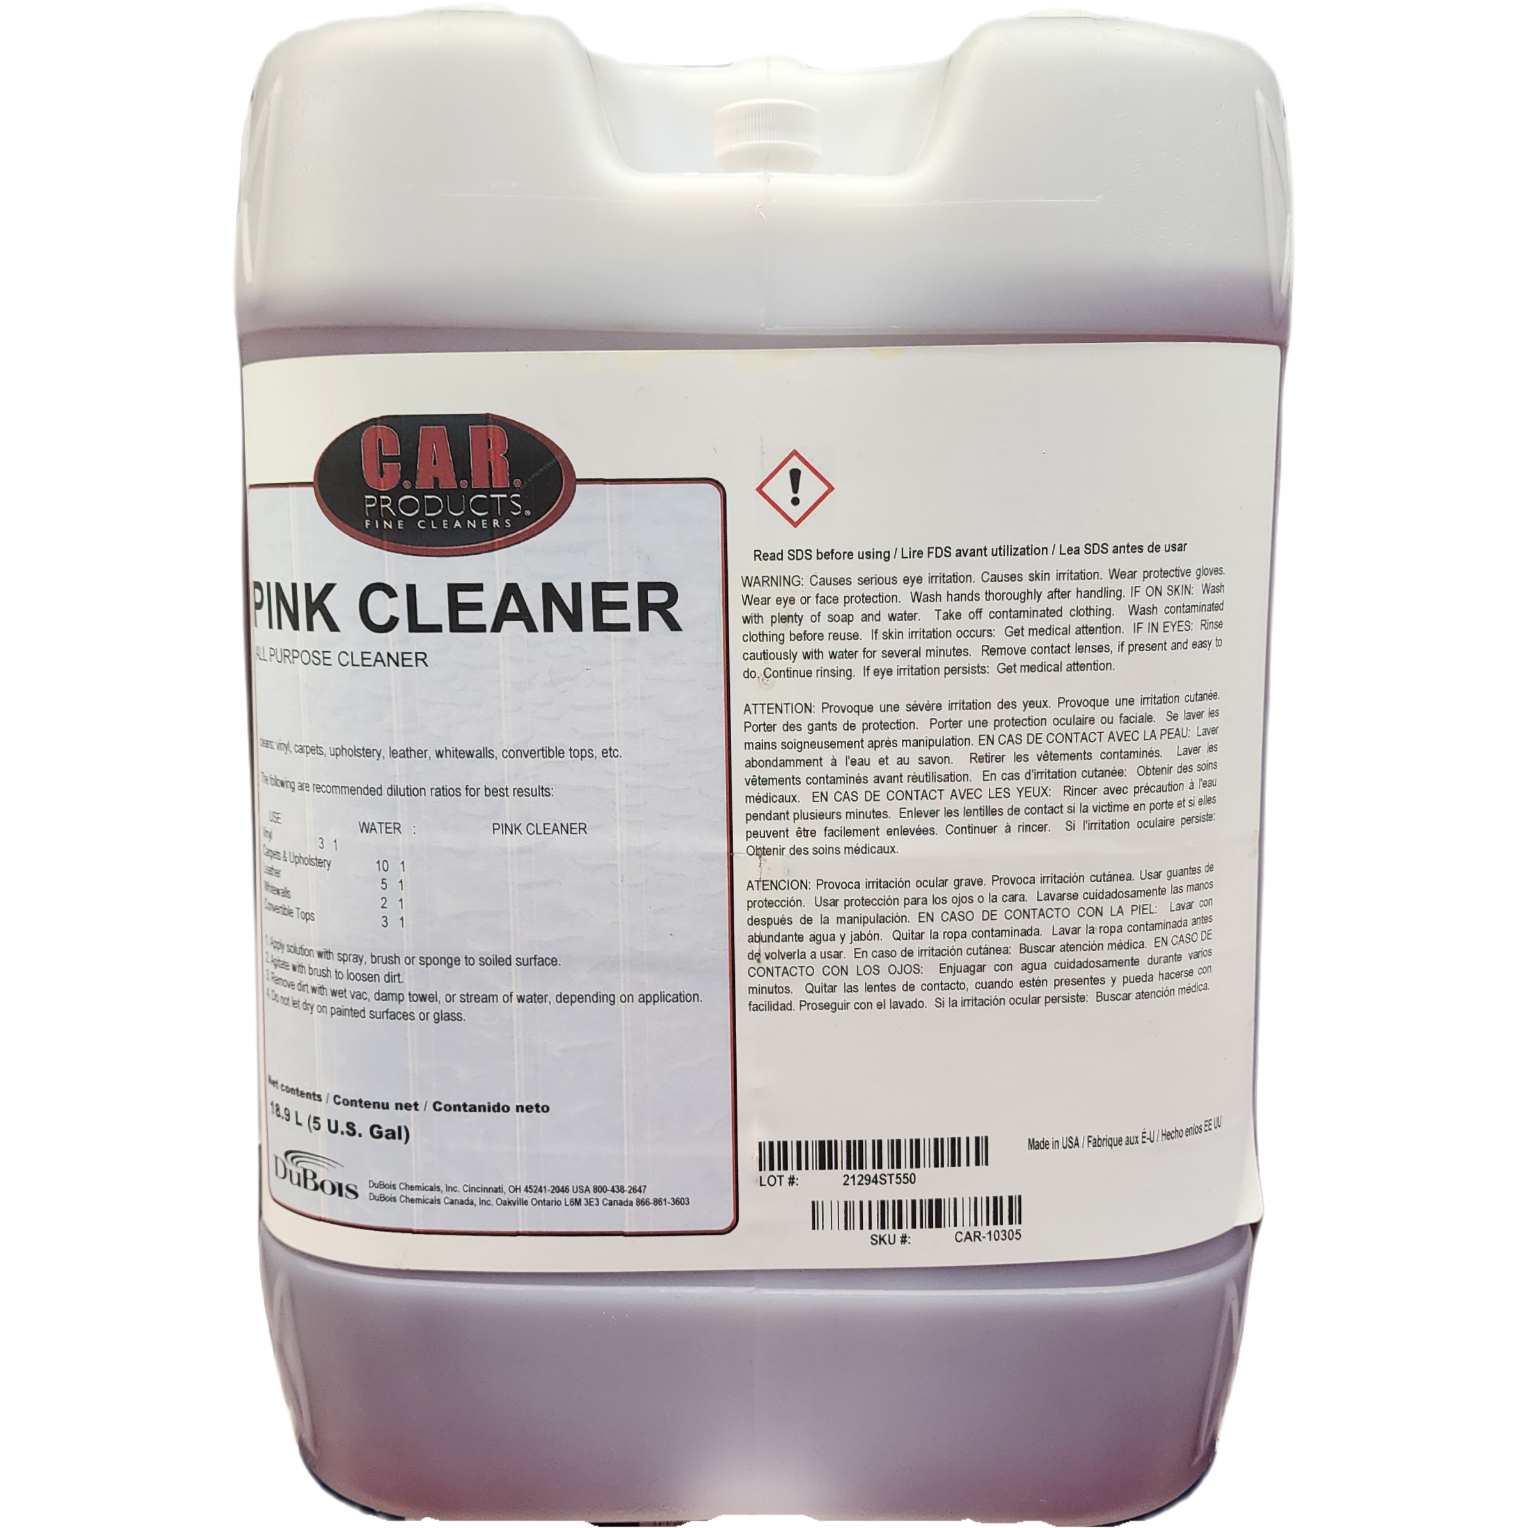 XCP CAR-10305 CAR Products Pink Cleaner All Purpose Cleaner (5 gal)